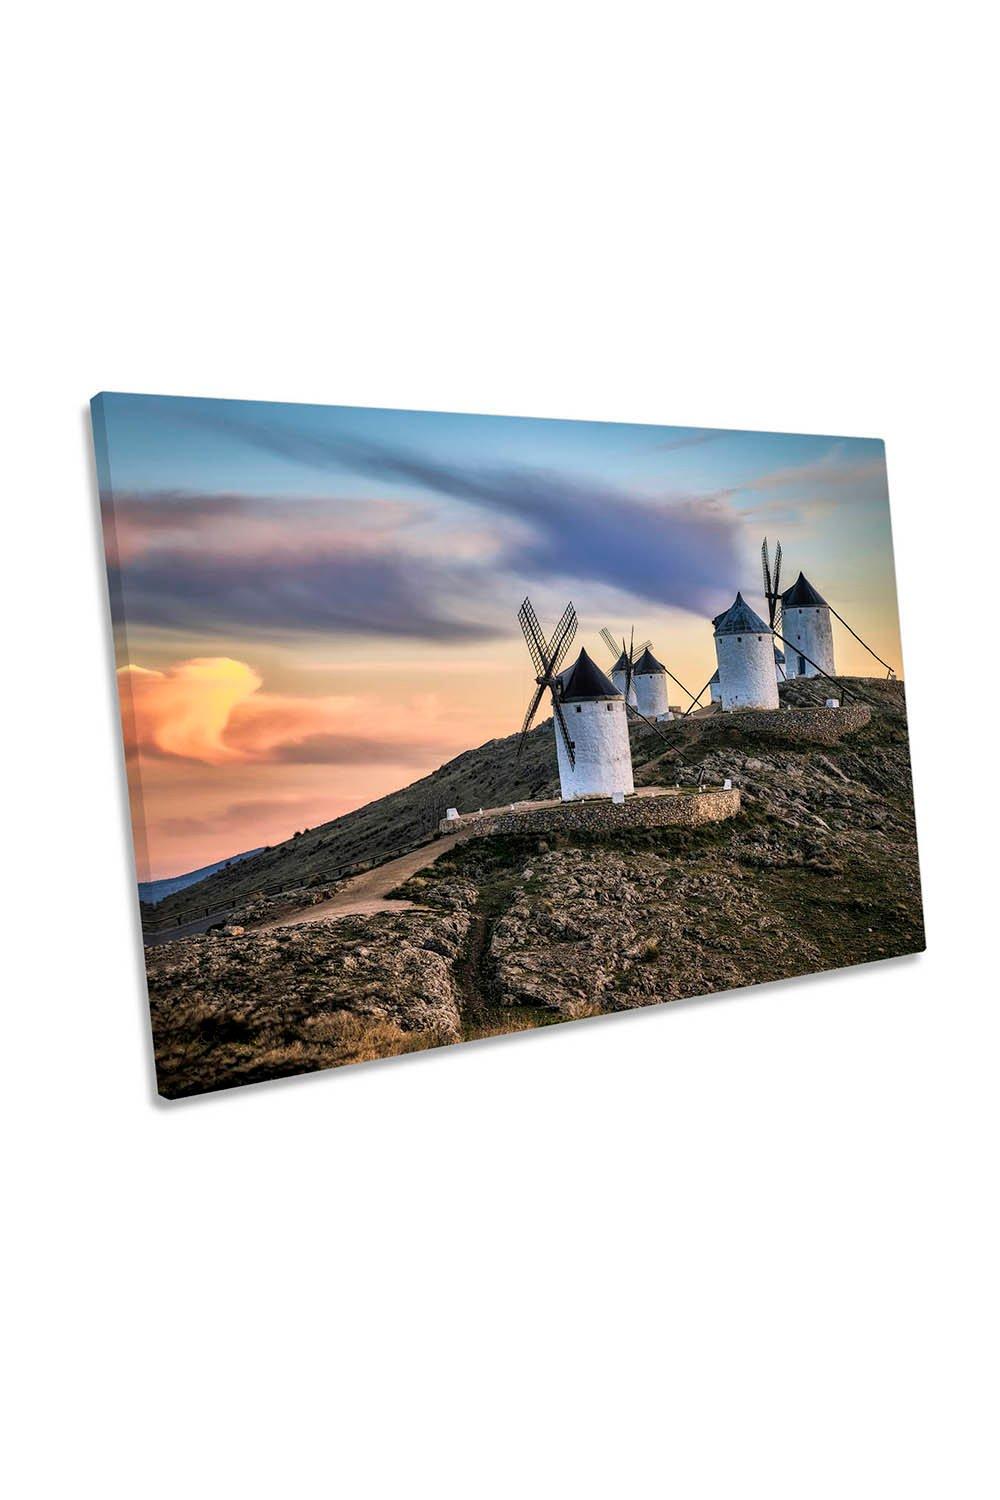 Molinos del Cuervo Windmill Spain Sunset Canvas Wall Art Picture Print